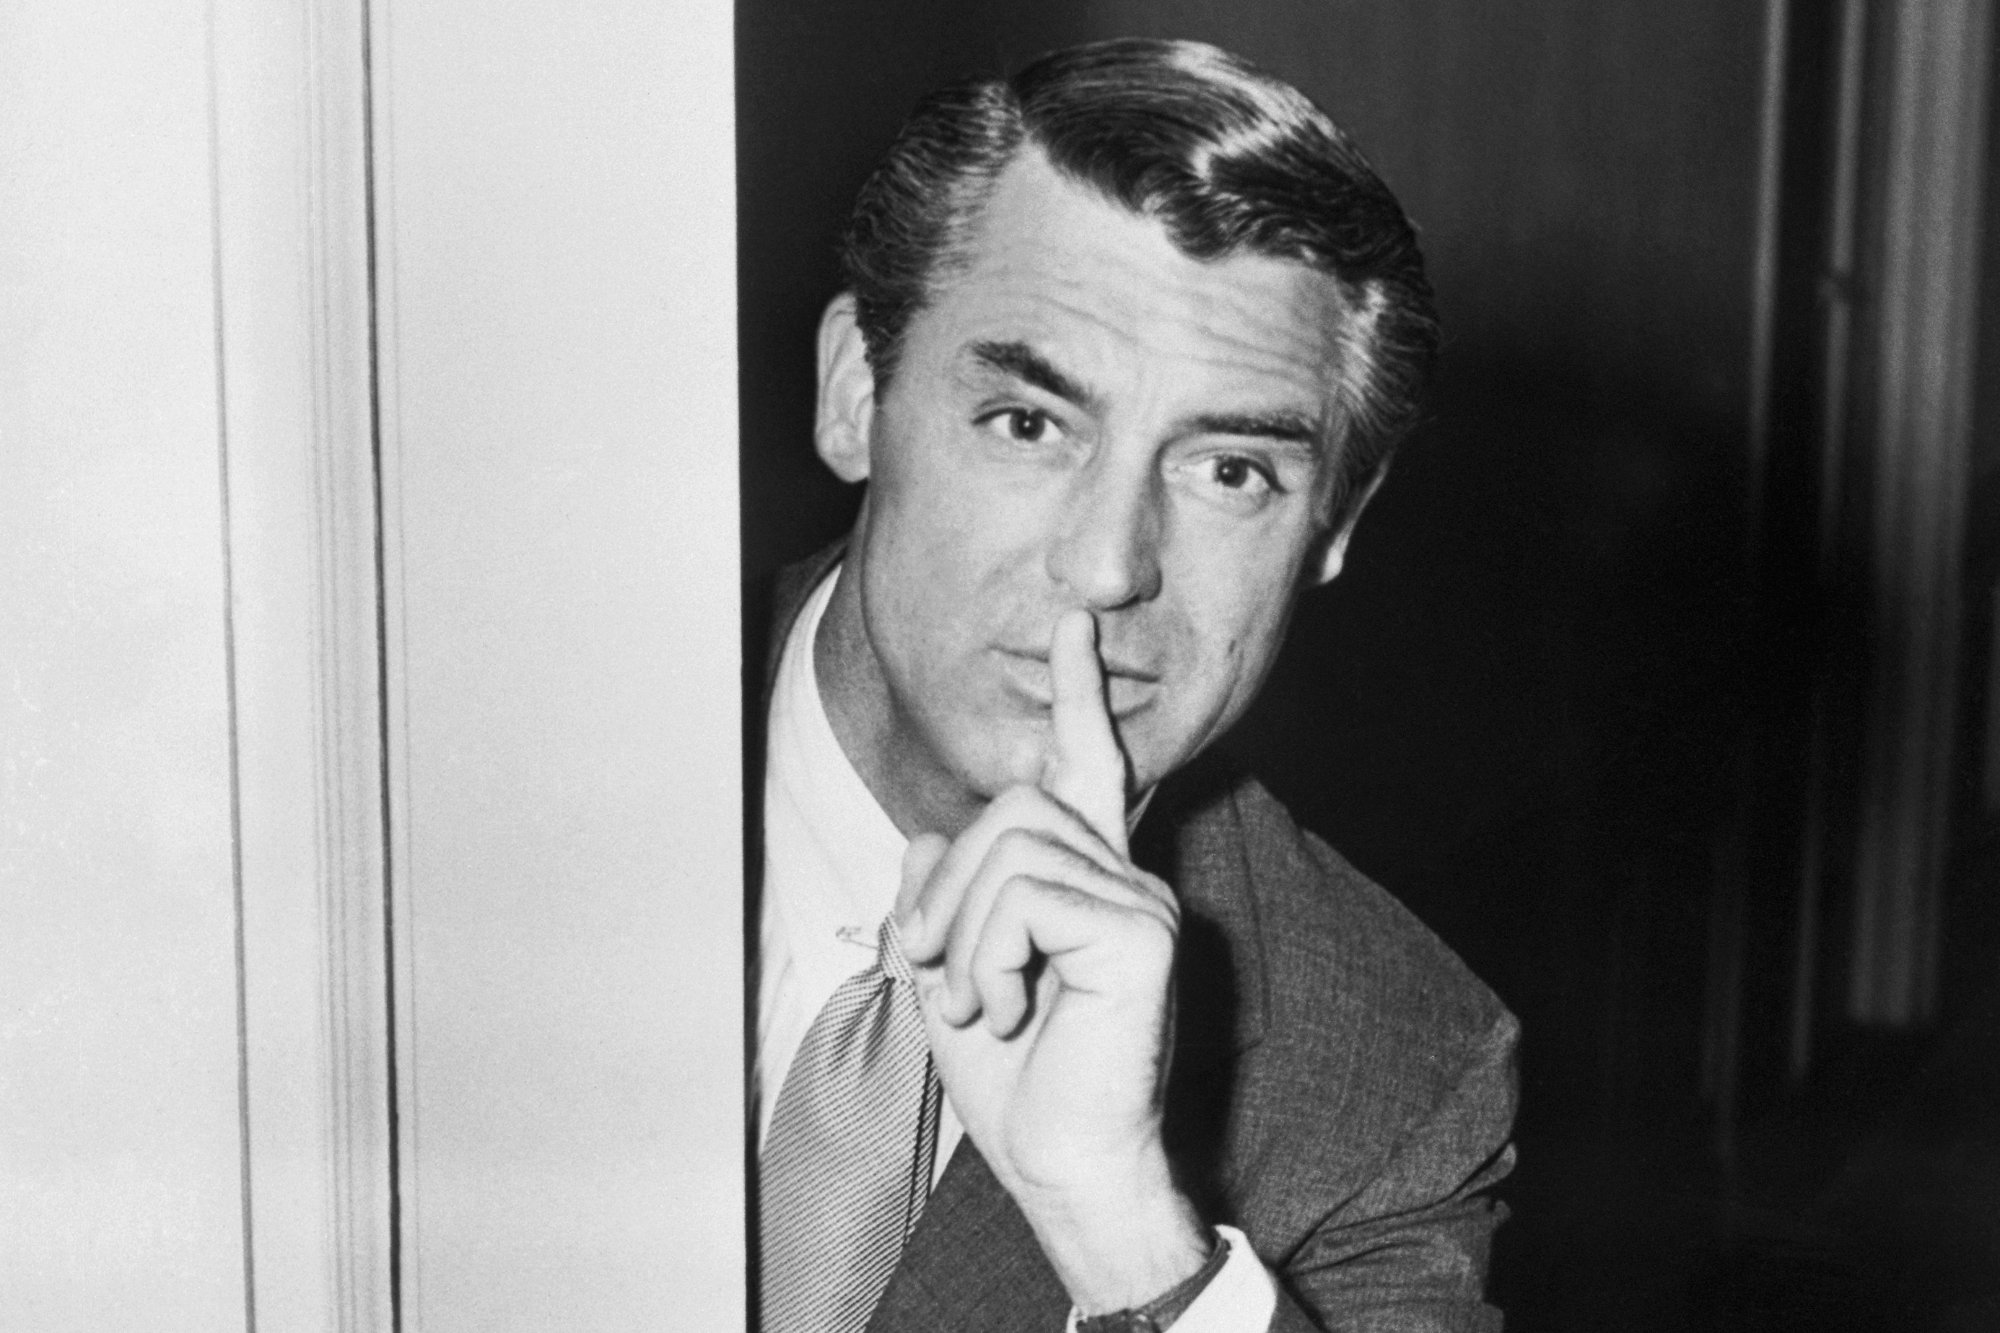 Cary Grant teasing movie project. He's holding a finger over his lips from behind a door. He's wearing a suit and tie.